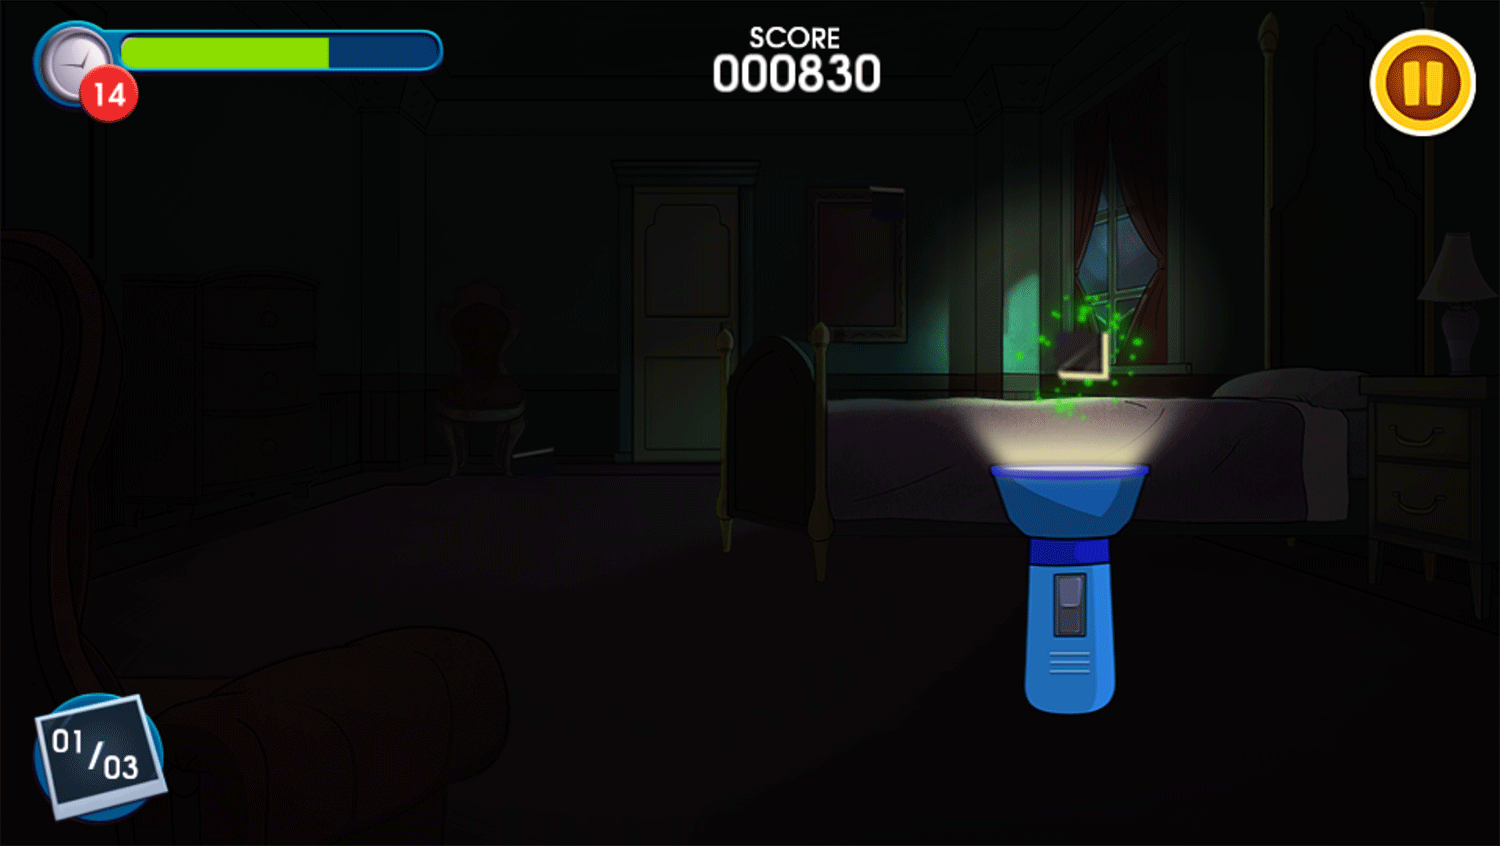 Be Cool Scooby Doo the Mysterious Mansion Find Clues Game Screenshot.